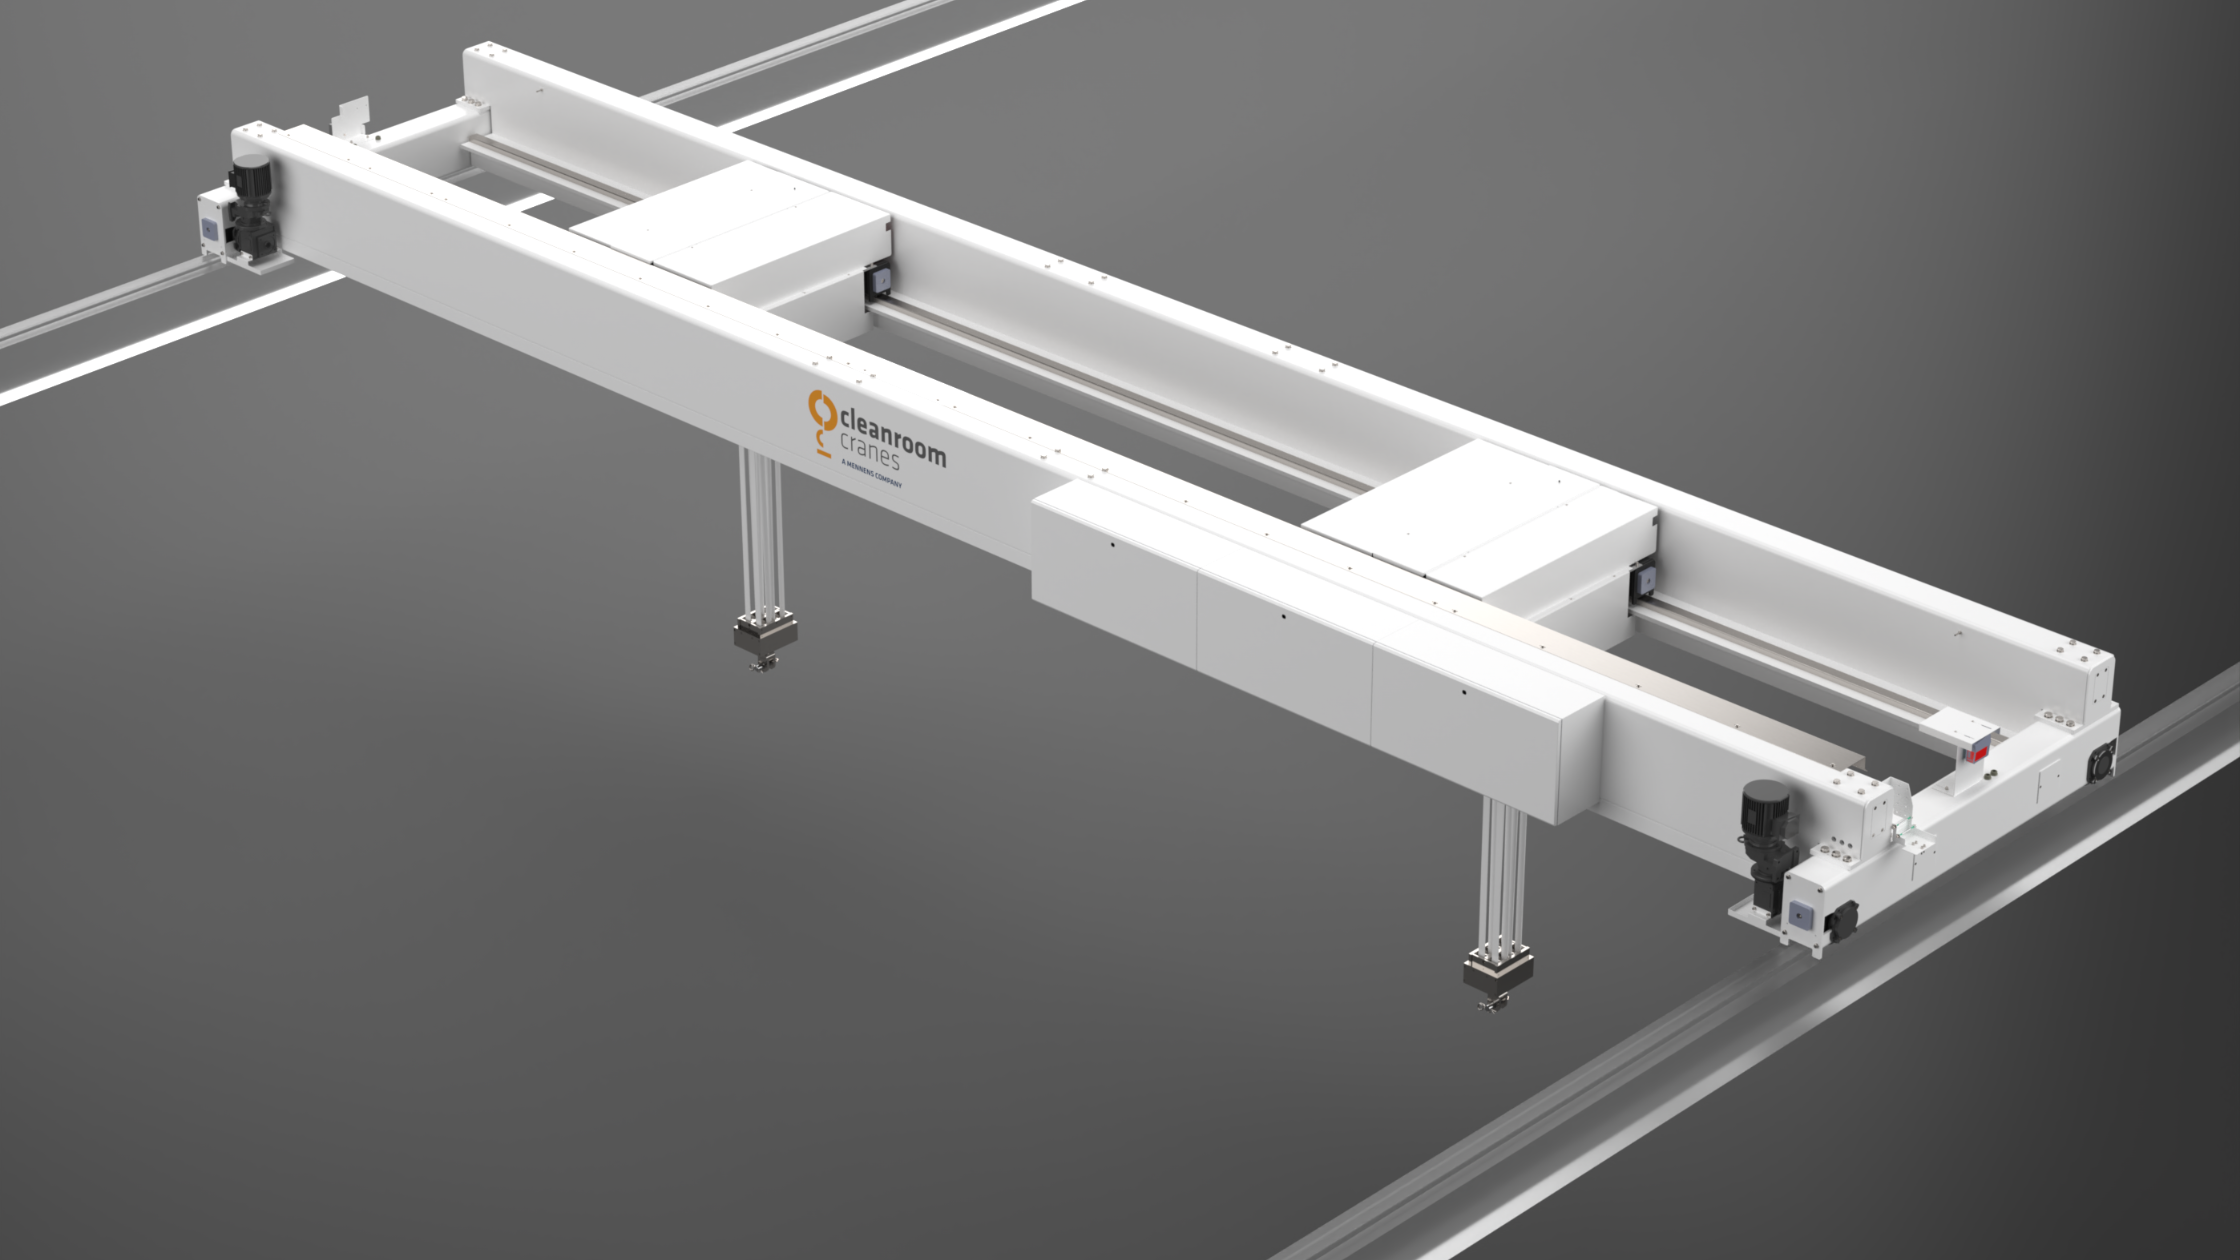 NXE overhead crane for cleanrooms